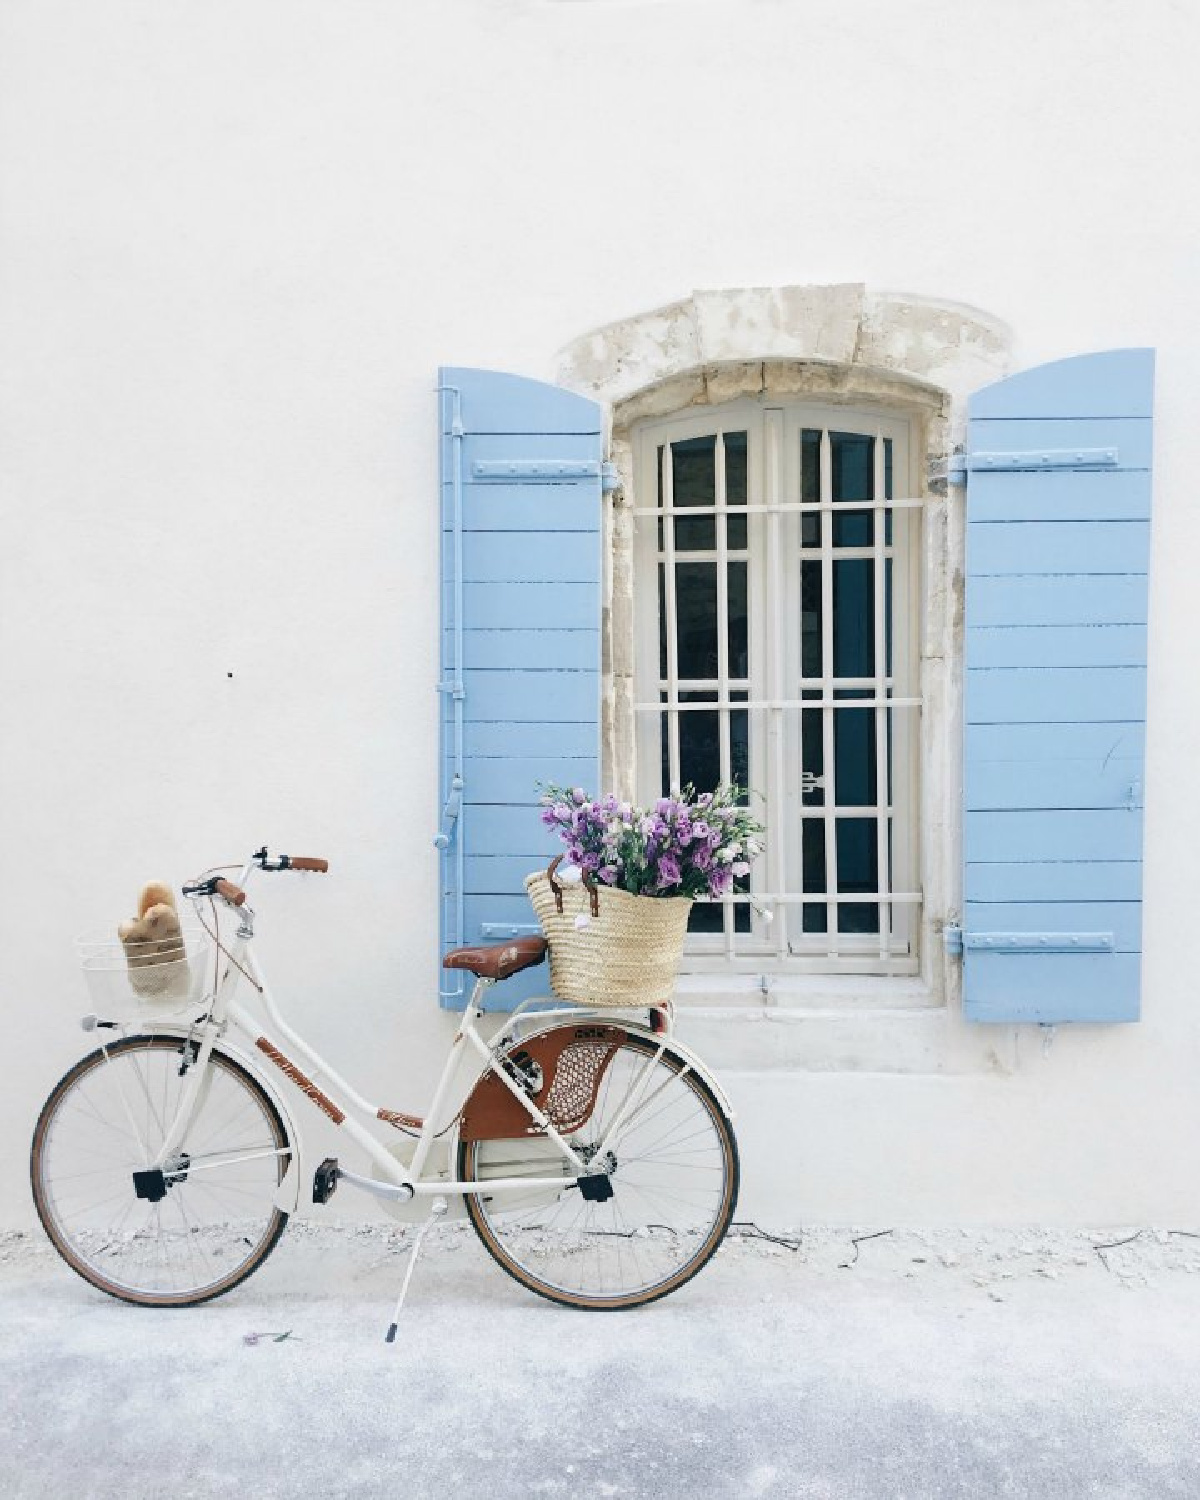 Charming French country vignette with white bicycle, French market basket of flowers, bright blue shutters, and a crisp white house exterior. Romantic indeed! Come be inspired by more French farmhouse design inspiration from Vivi et Margot on Hello Lovely. #vivietmargot #frenchfarmhouse #bicycle #frenchbasket #shutters #marketbasket #romanticdecor #frenchcountry